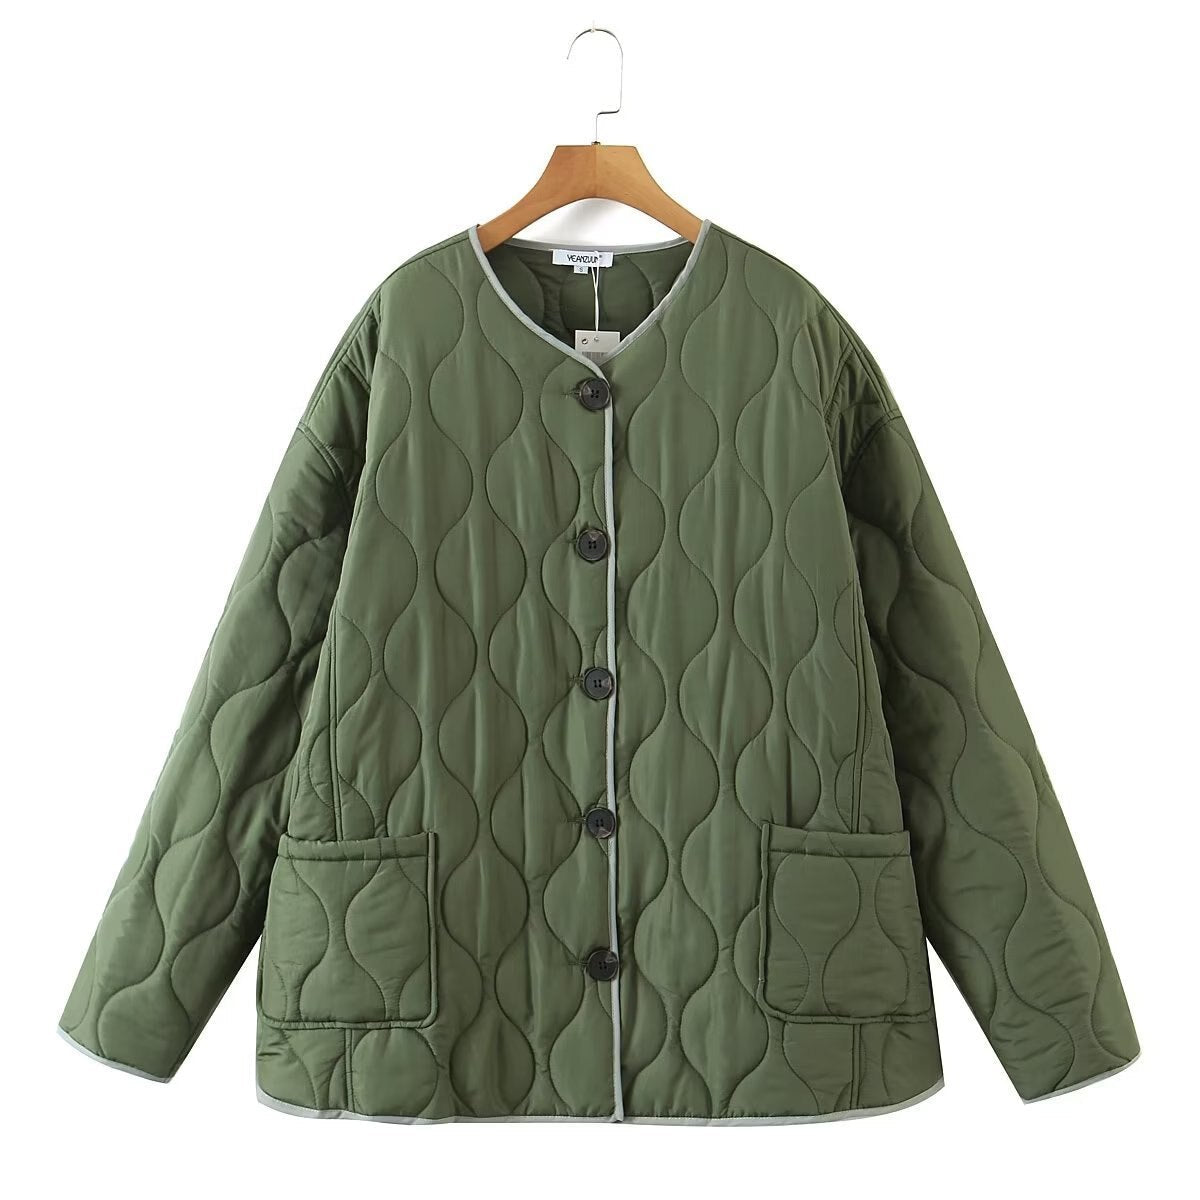 Fashion O Neck Single-breasted Diamond-shaped Padded ArmyGreen Quilted Coat Women   Autumn Winter New Casual Street Outwear